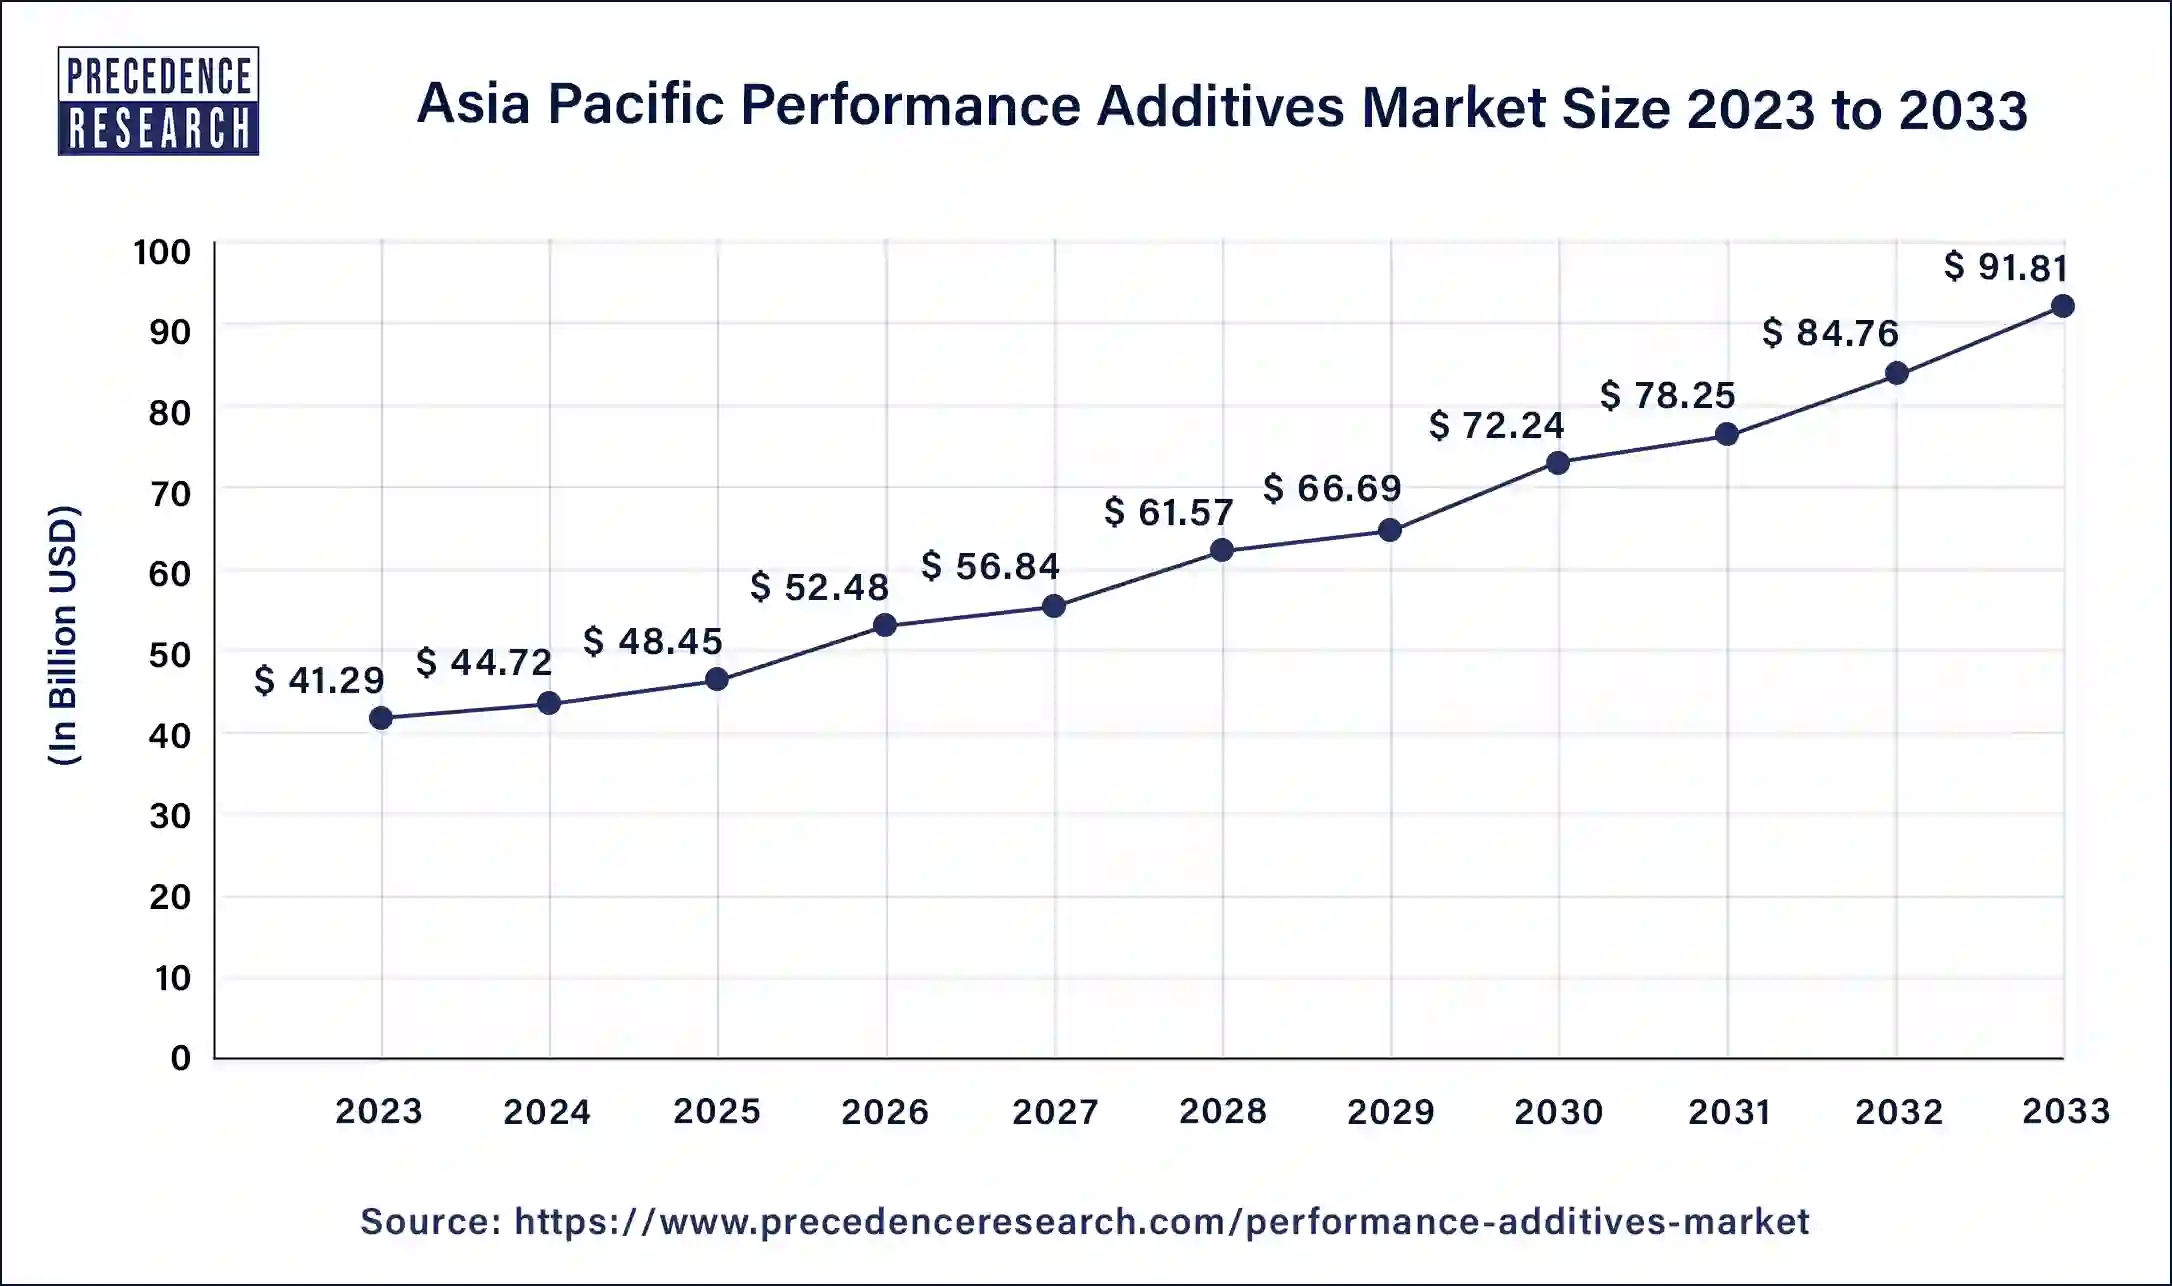 Asia Pacific Performance Additives Market Size 2024 to 2033